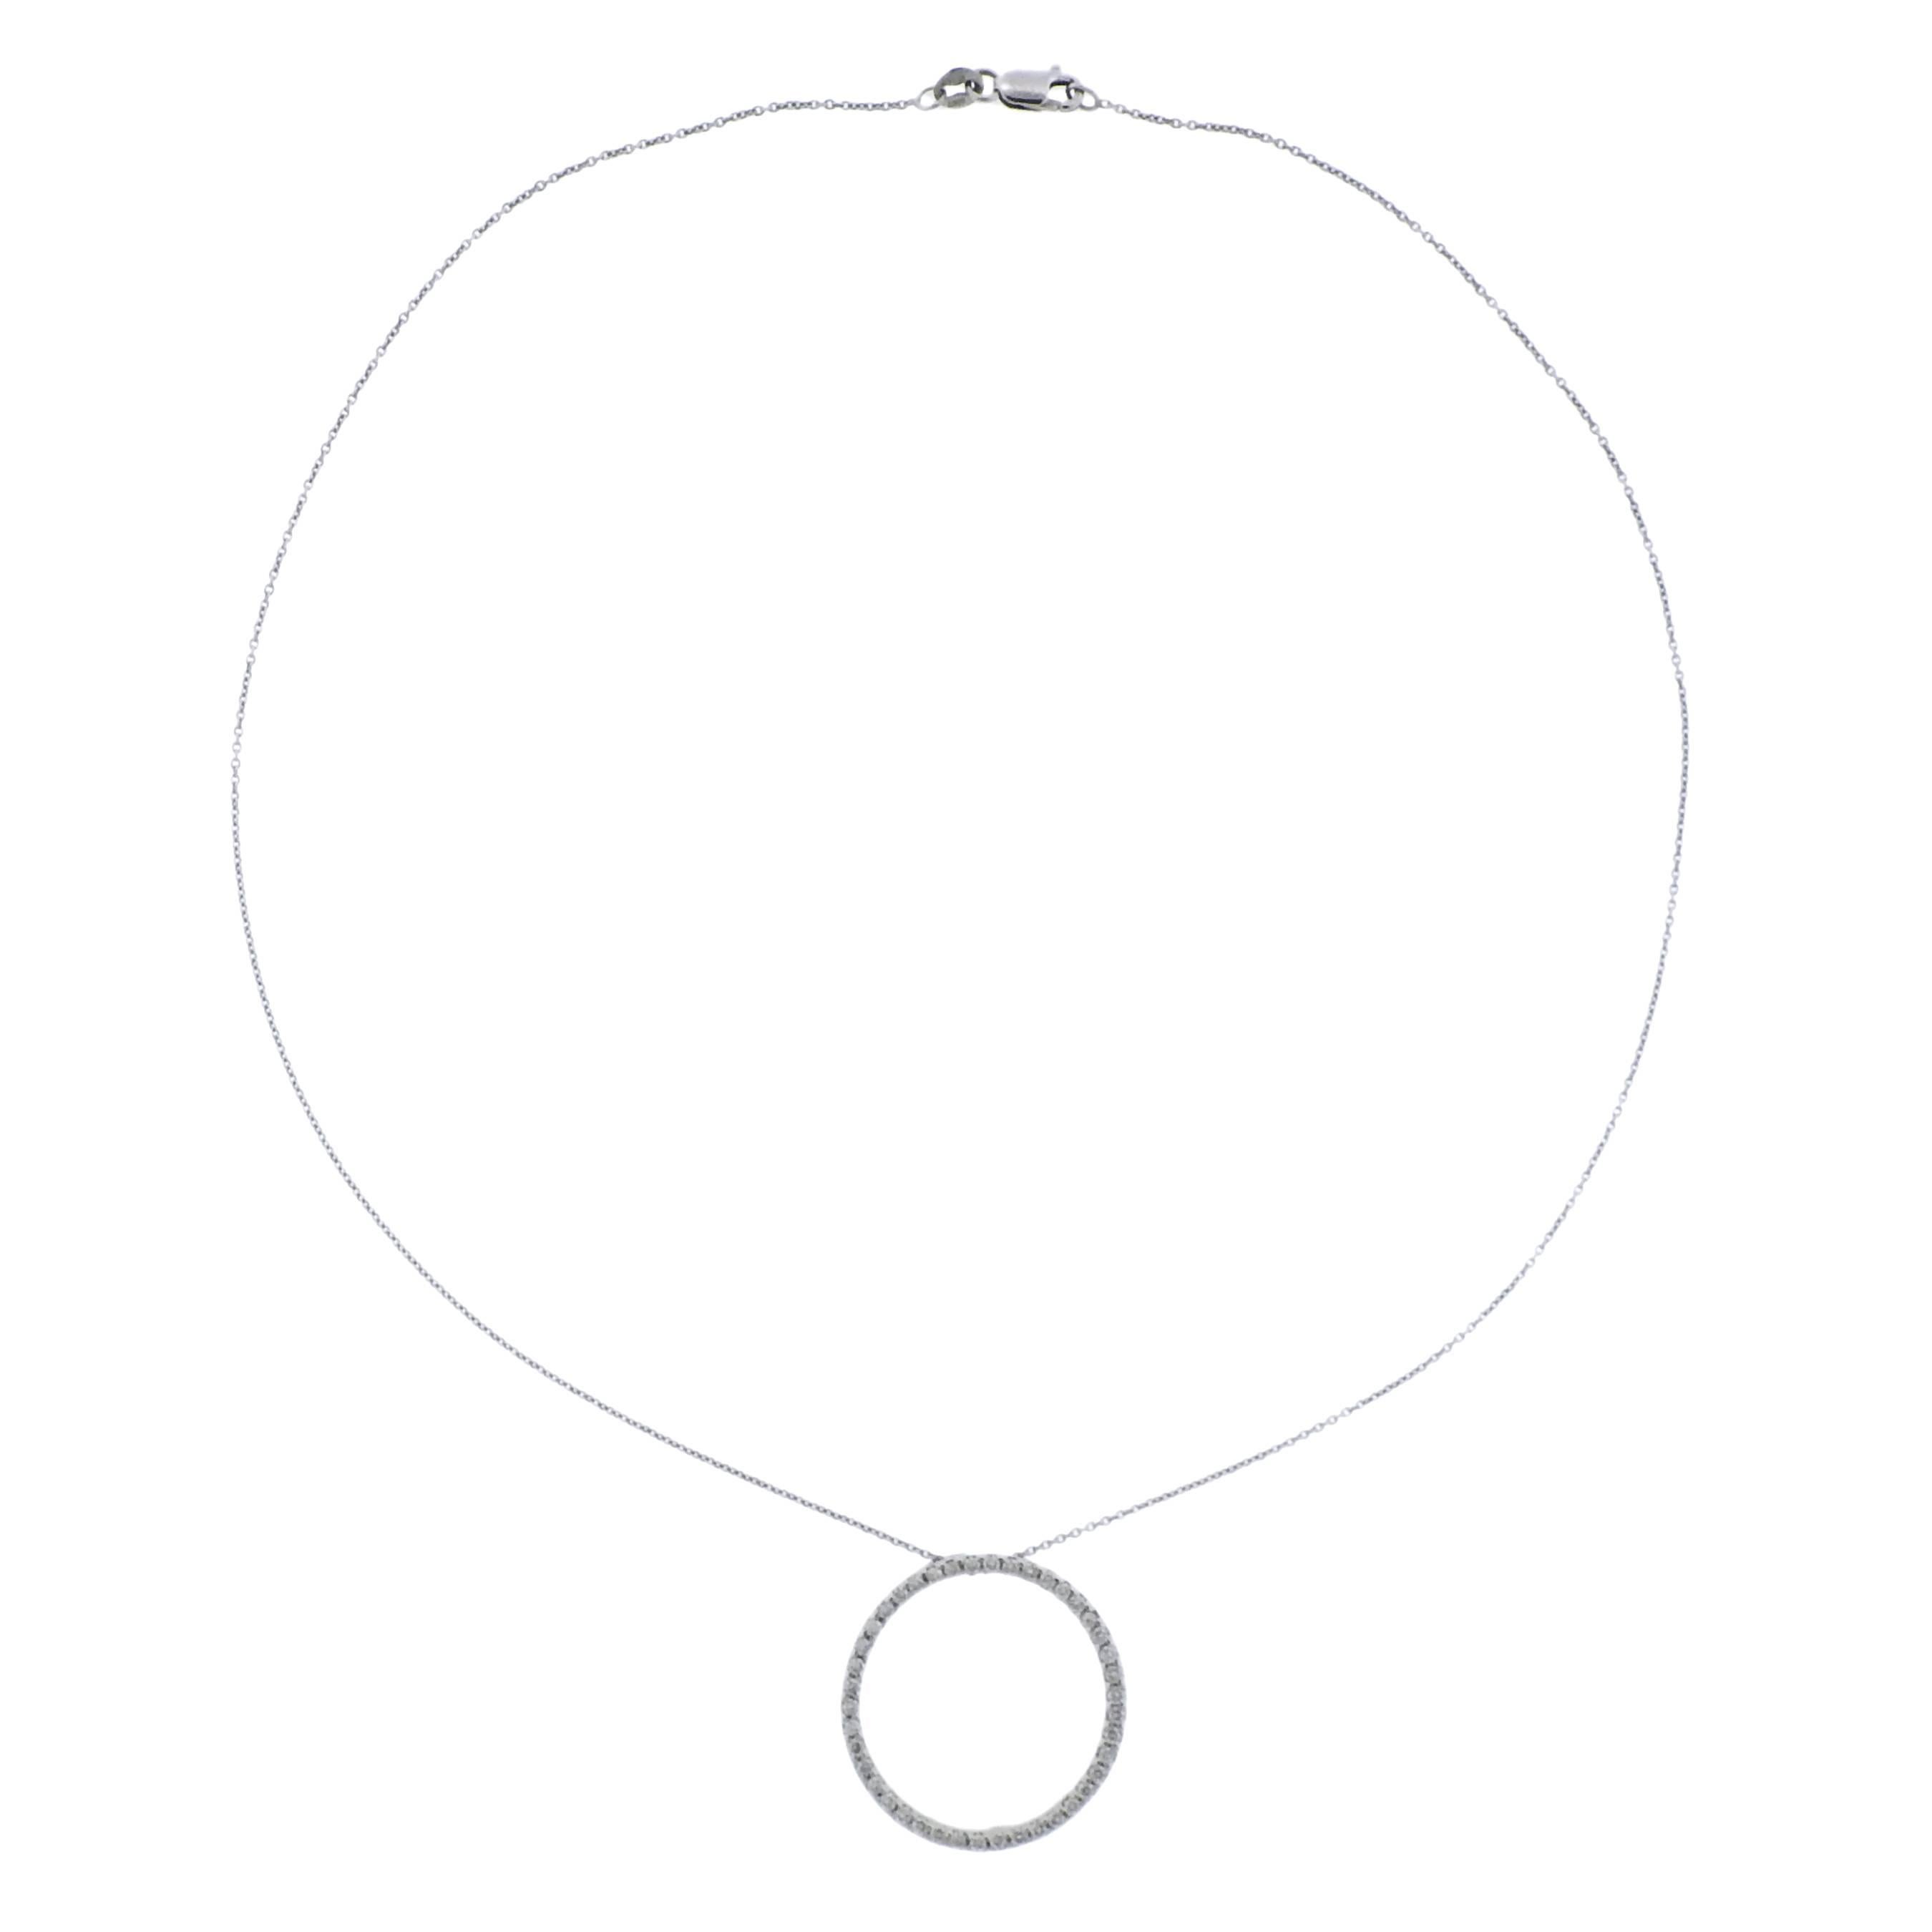  18k white gold chain with circle pendant, crafted by Roberto Coin, set with approx. 0.42ctw in G/VS diamonds. Necklace is 16